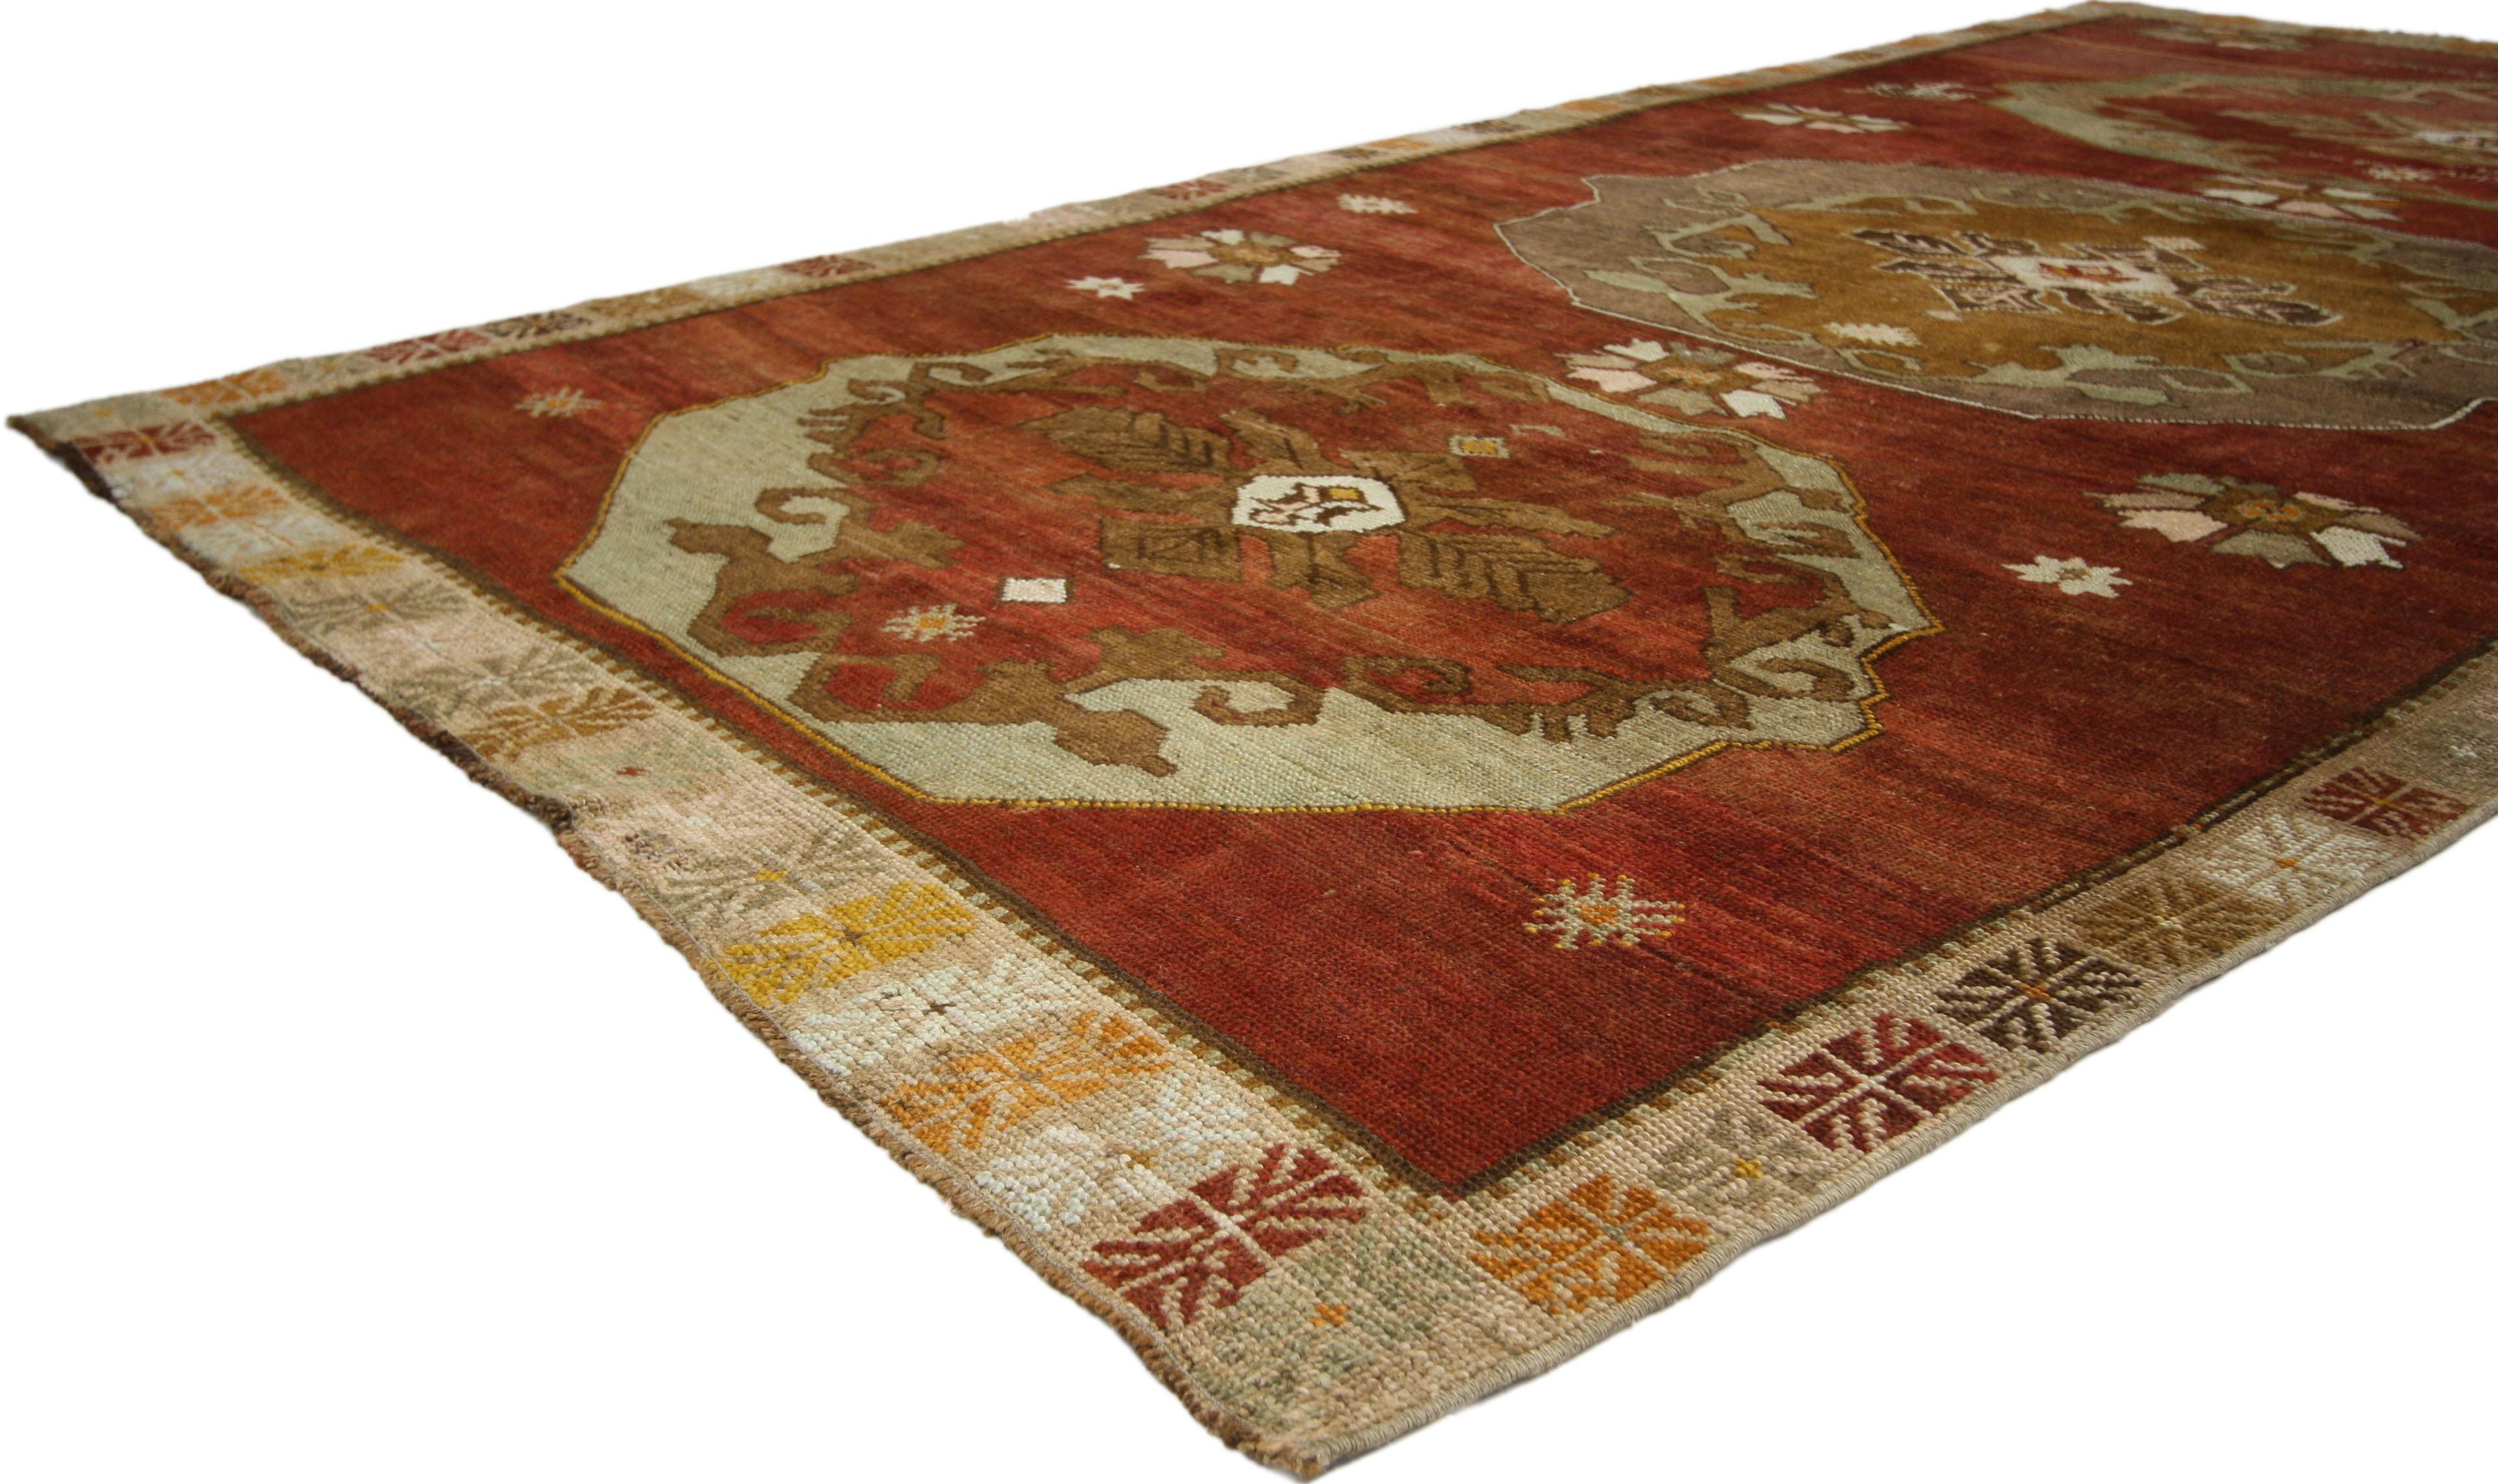 52316, vintage Turkish Oushak gallery rug with Jacobean or Tudor style. This hand knotted wool vintage Turkish Oushak rug features three large hexagonal floral medallions spread across an abrashed red field. The medallions each contain bold interior